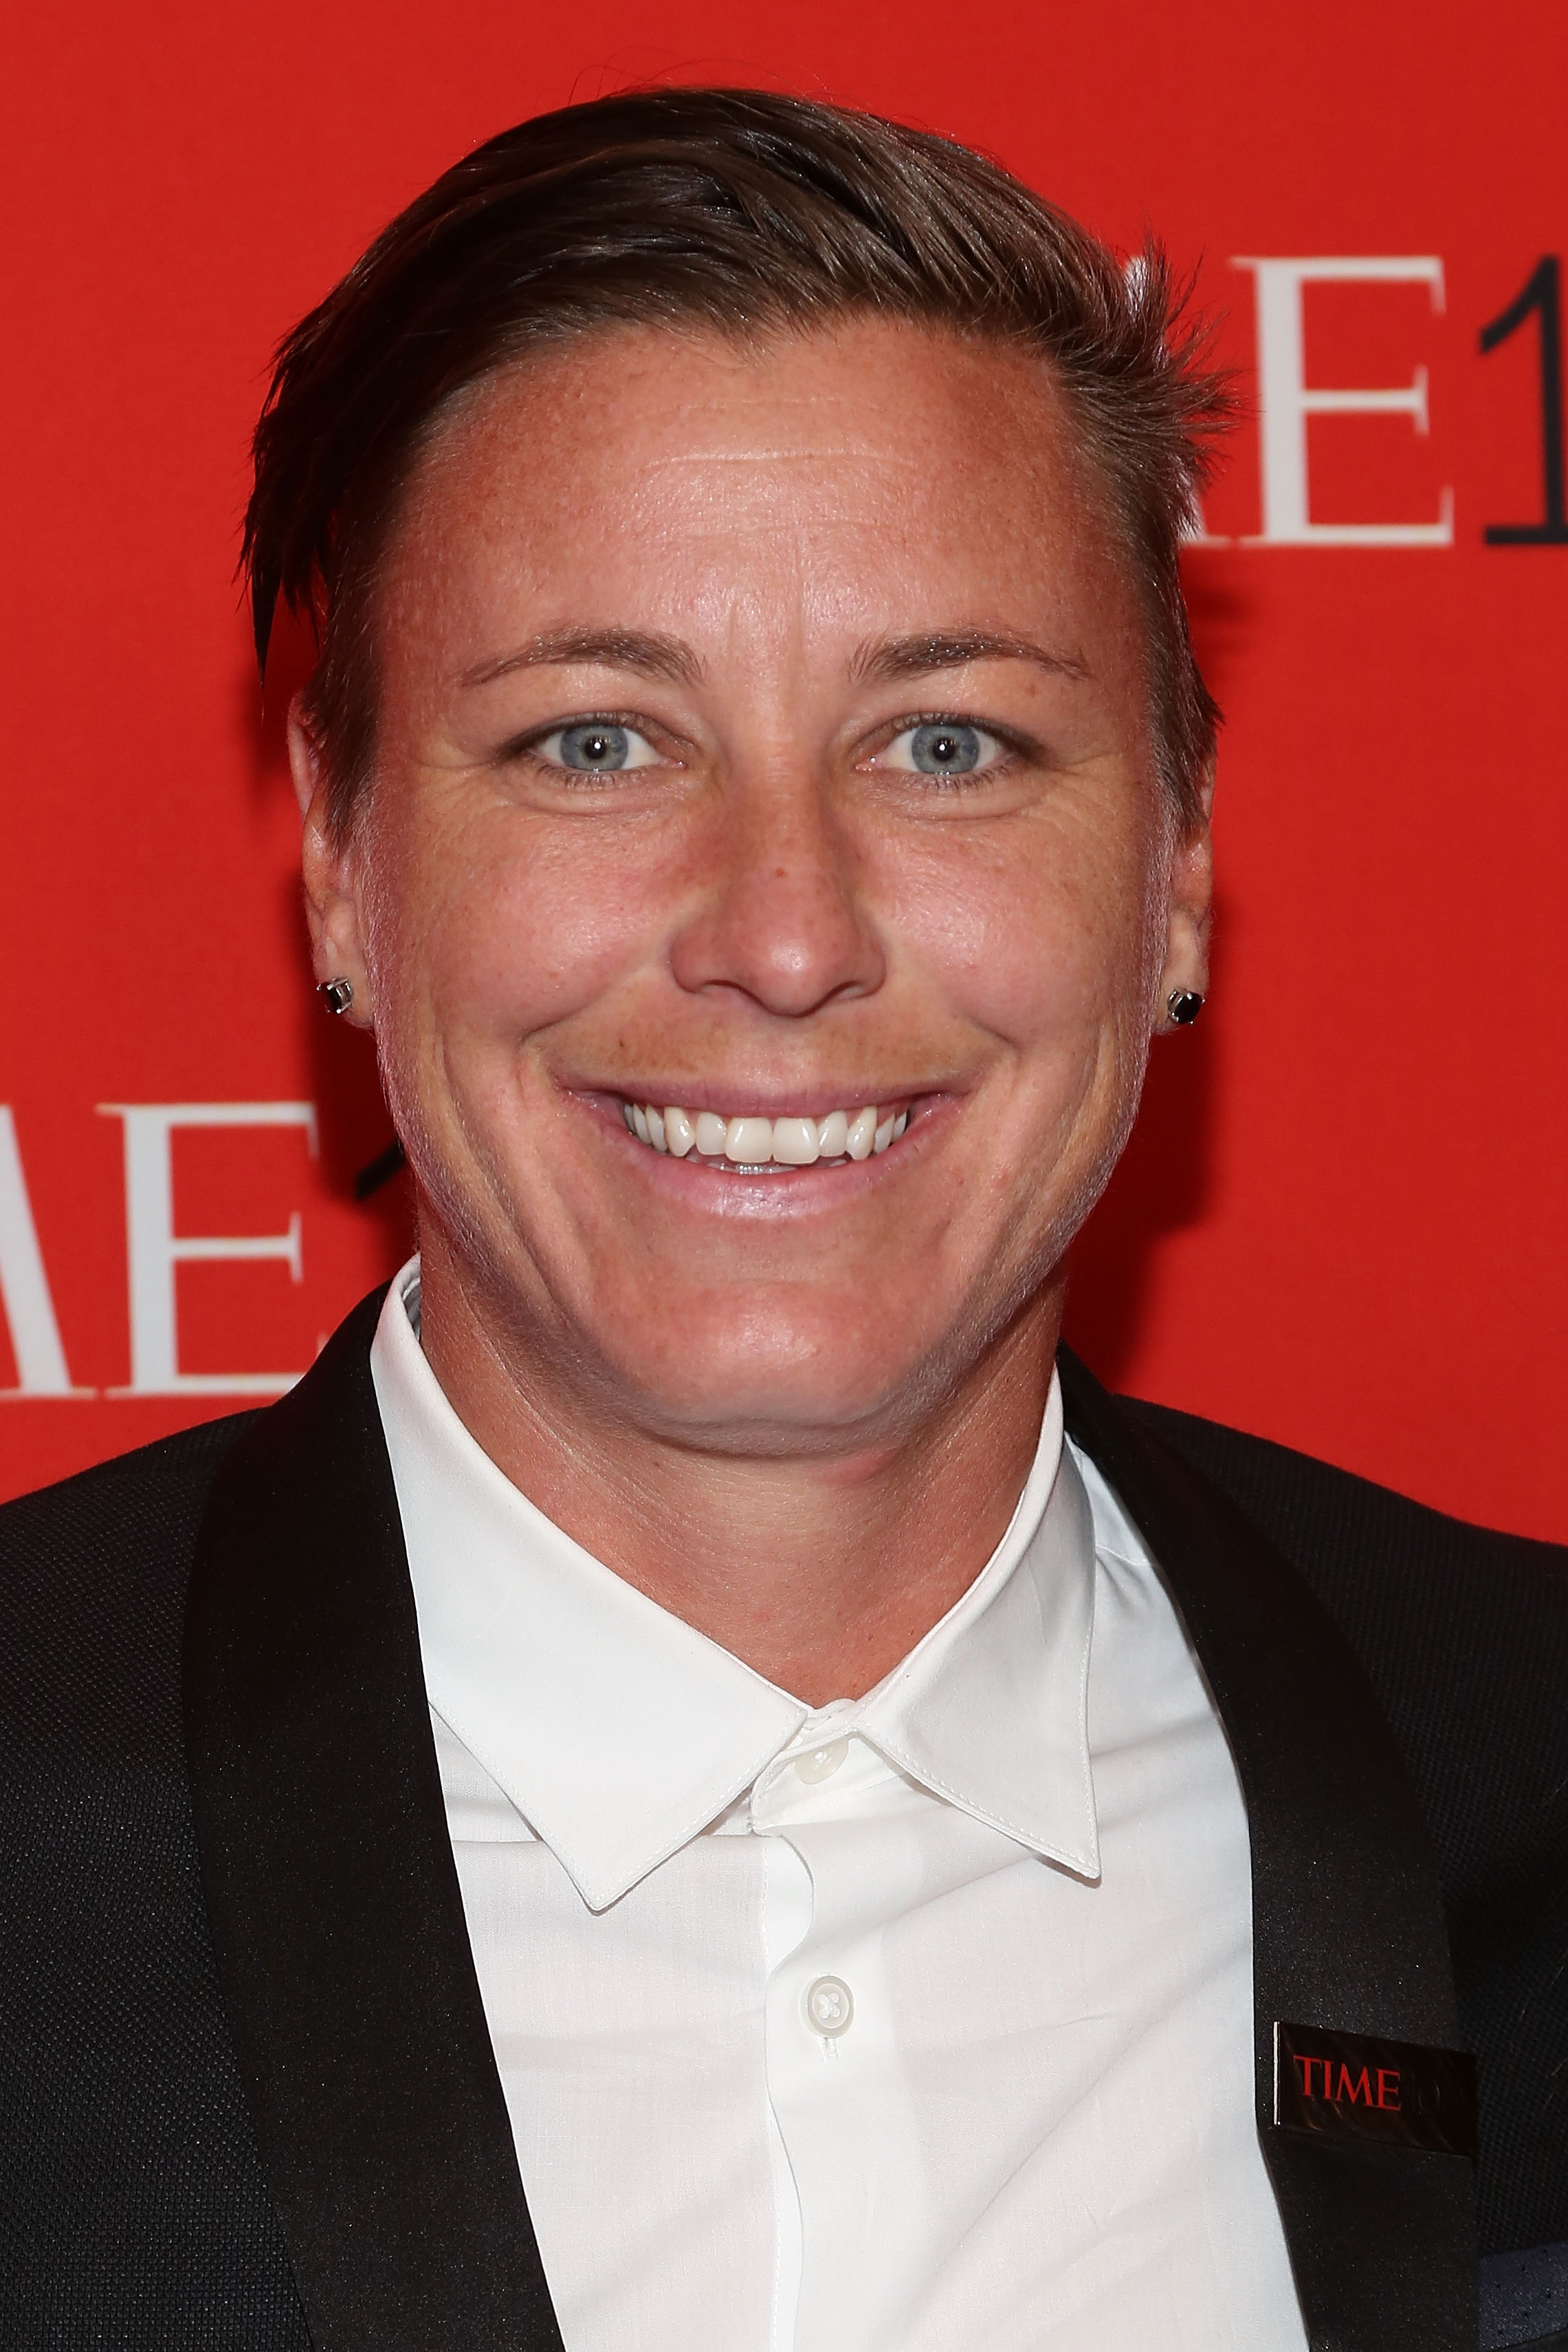 Abby Wambach at the 2015 Time 100 Gala in New York City on April 21, 2015. (Taylor Hill—Getty Images)